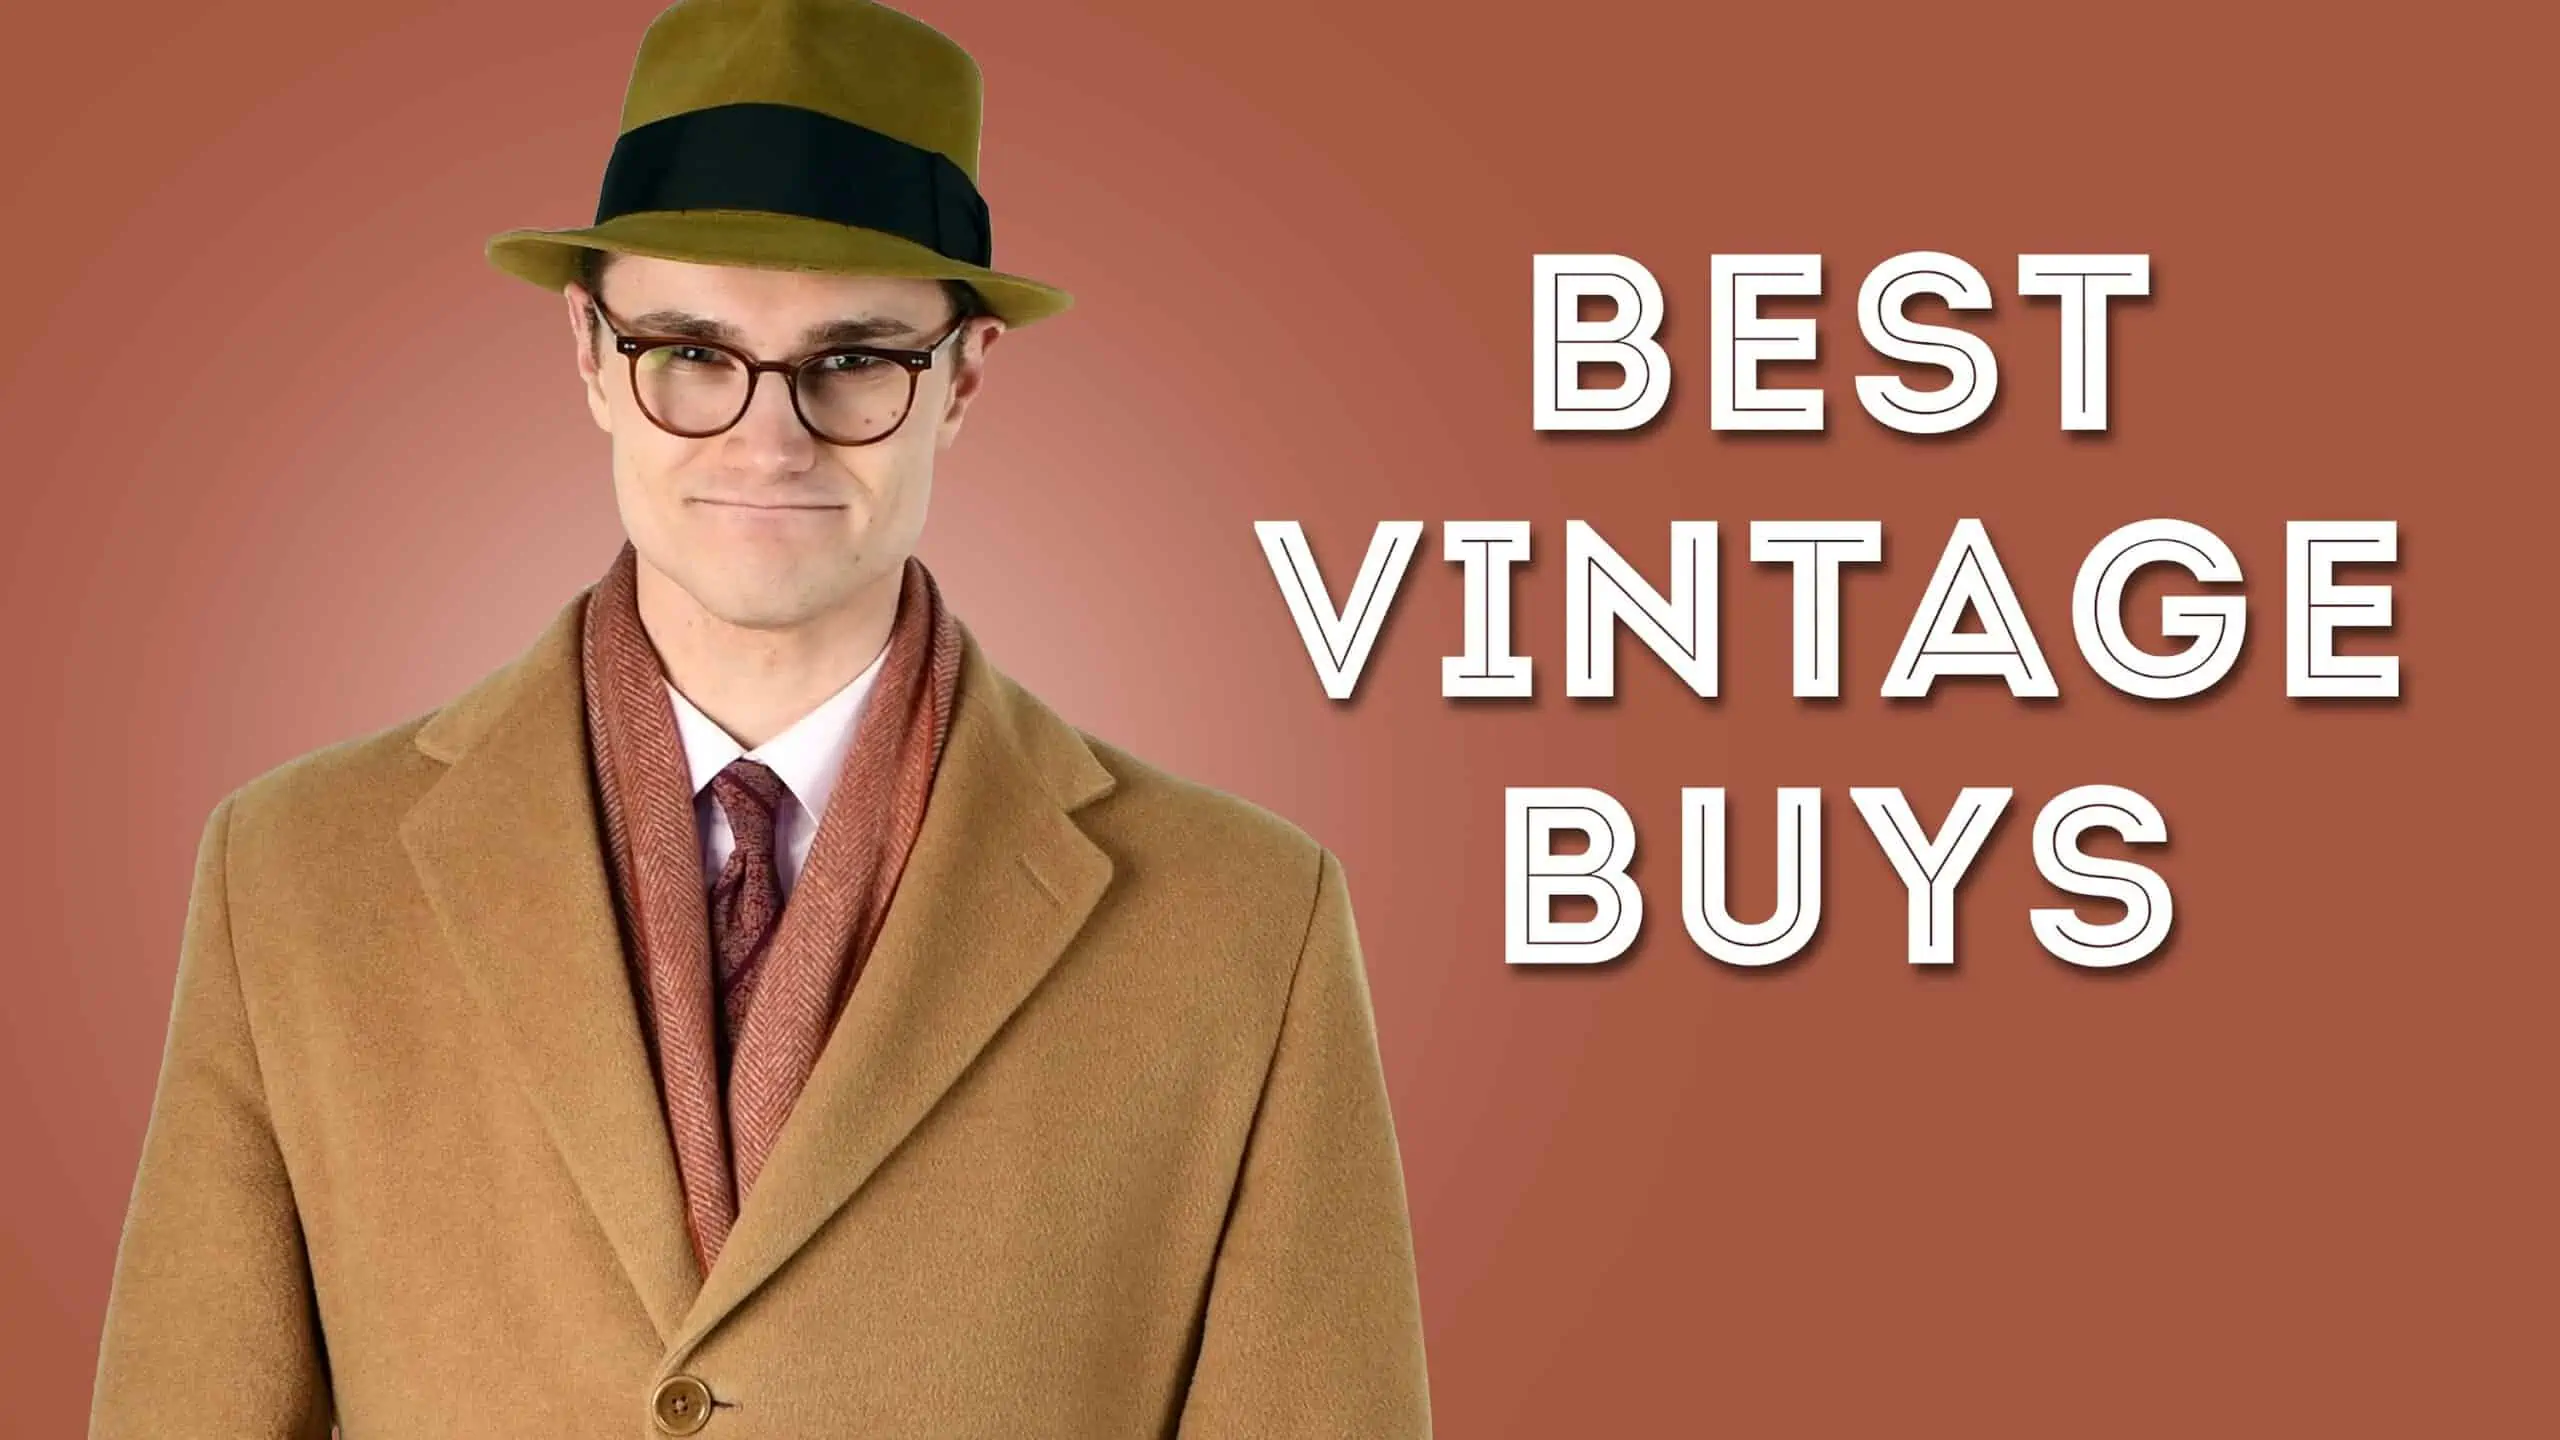 best vintage buys 3840x2160 scaled